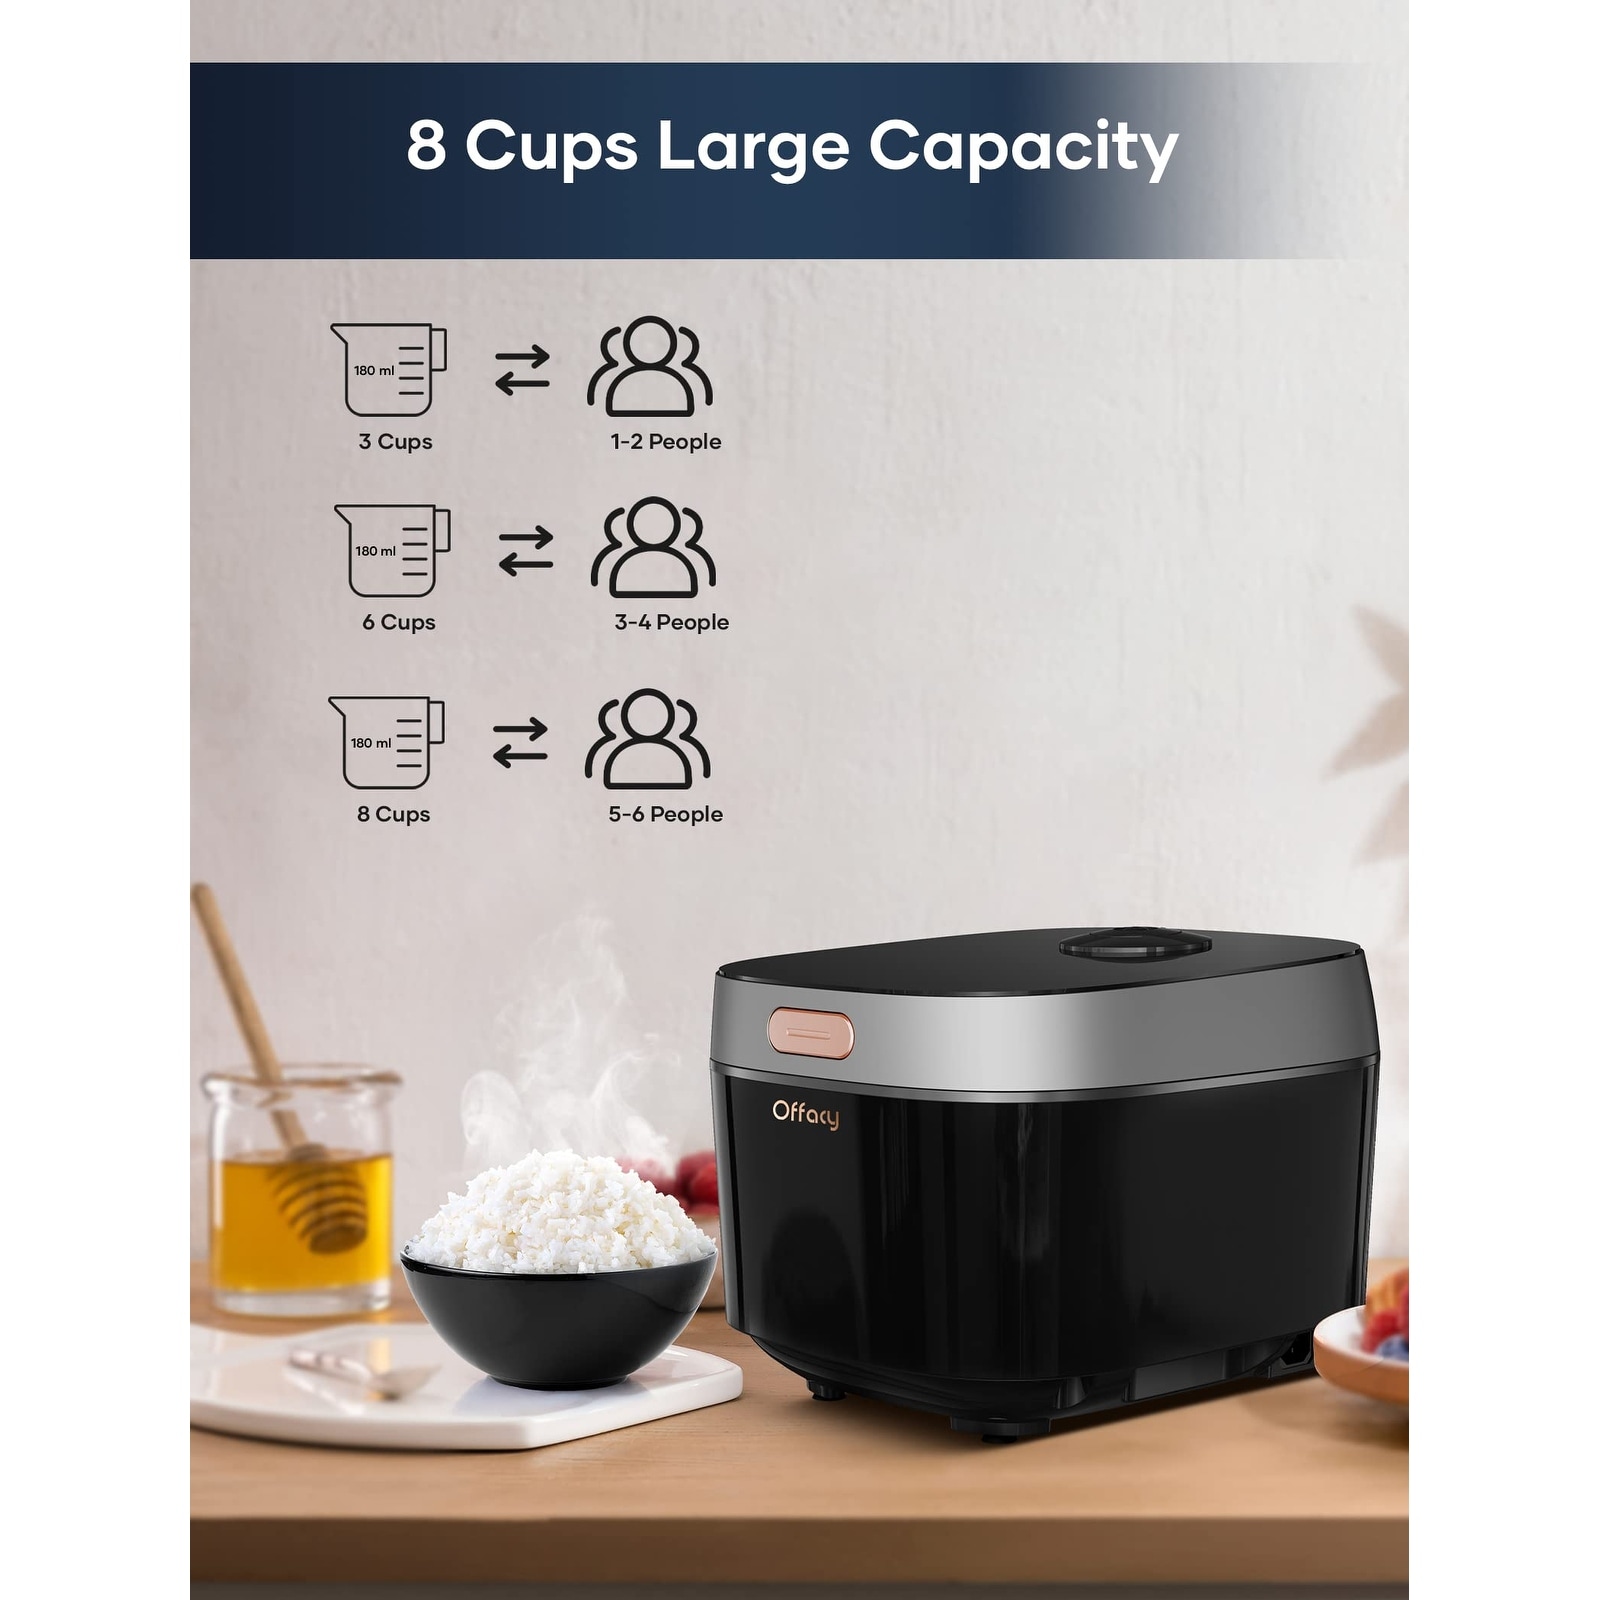 Offacy Smart Mini Rice Cooker, 3 Cups (Uncooked) Small Capacity, 24-H Delay Timer, Auto Keep Warm, Nonstick Inner Pot, for Soft White Rice, Brown